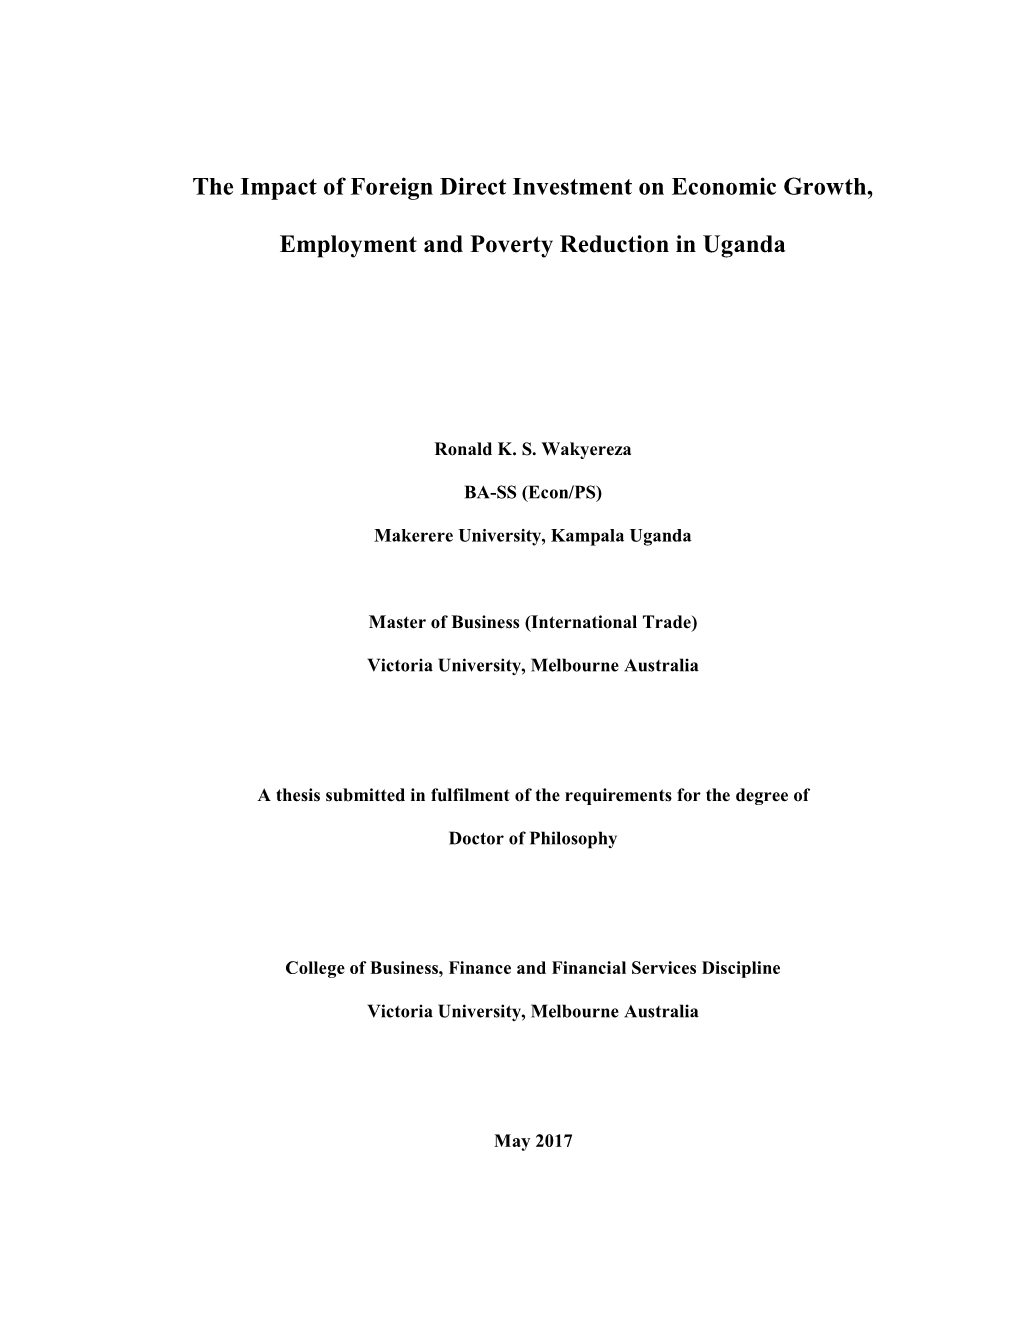 The Impact of Foreign Direct Investment on Economic Growth